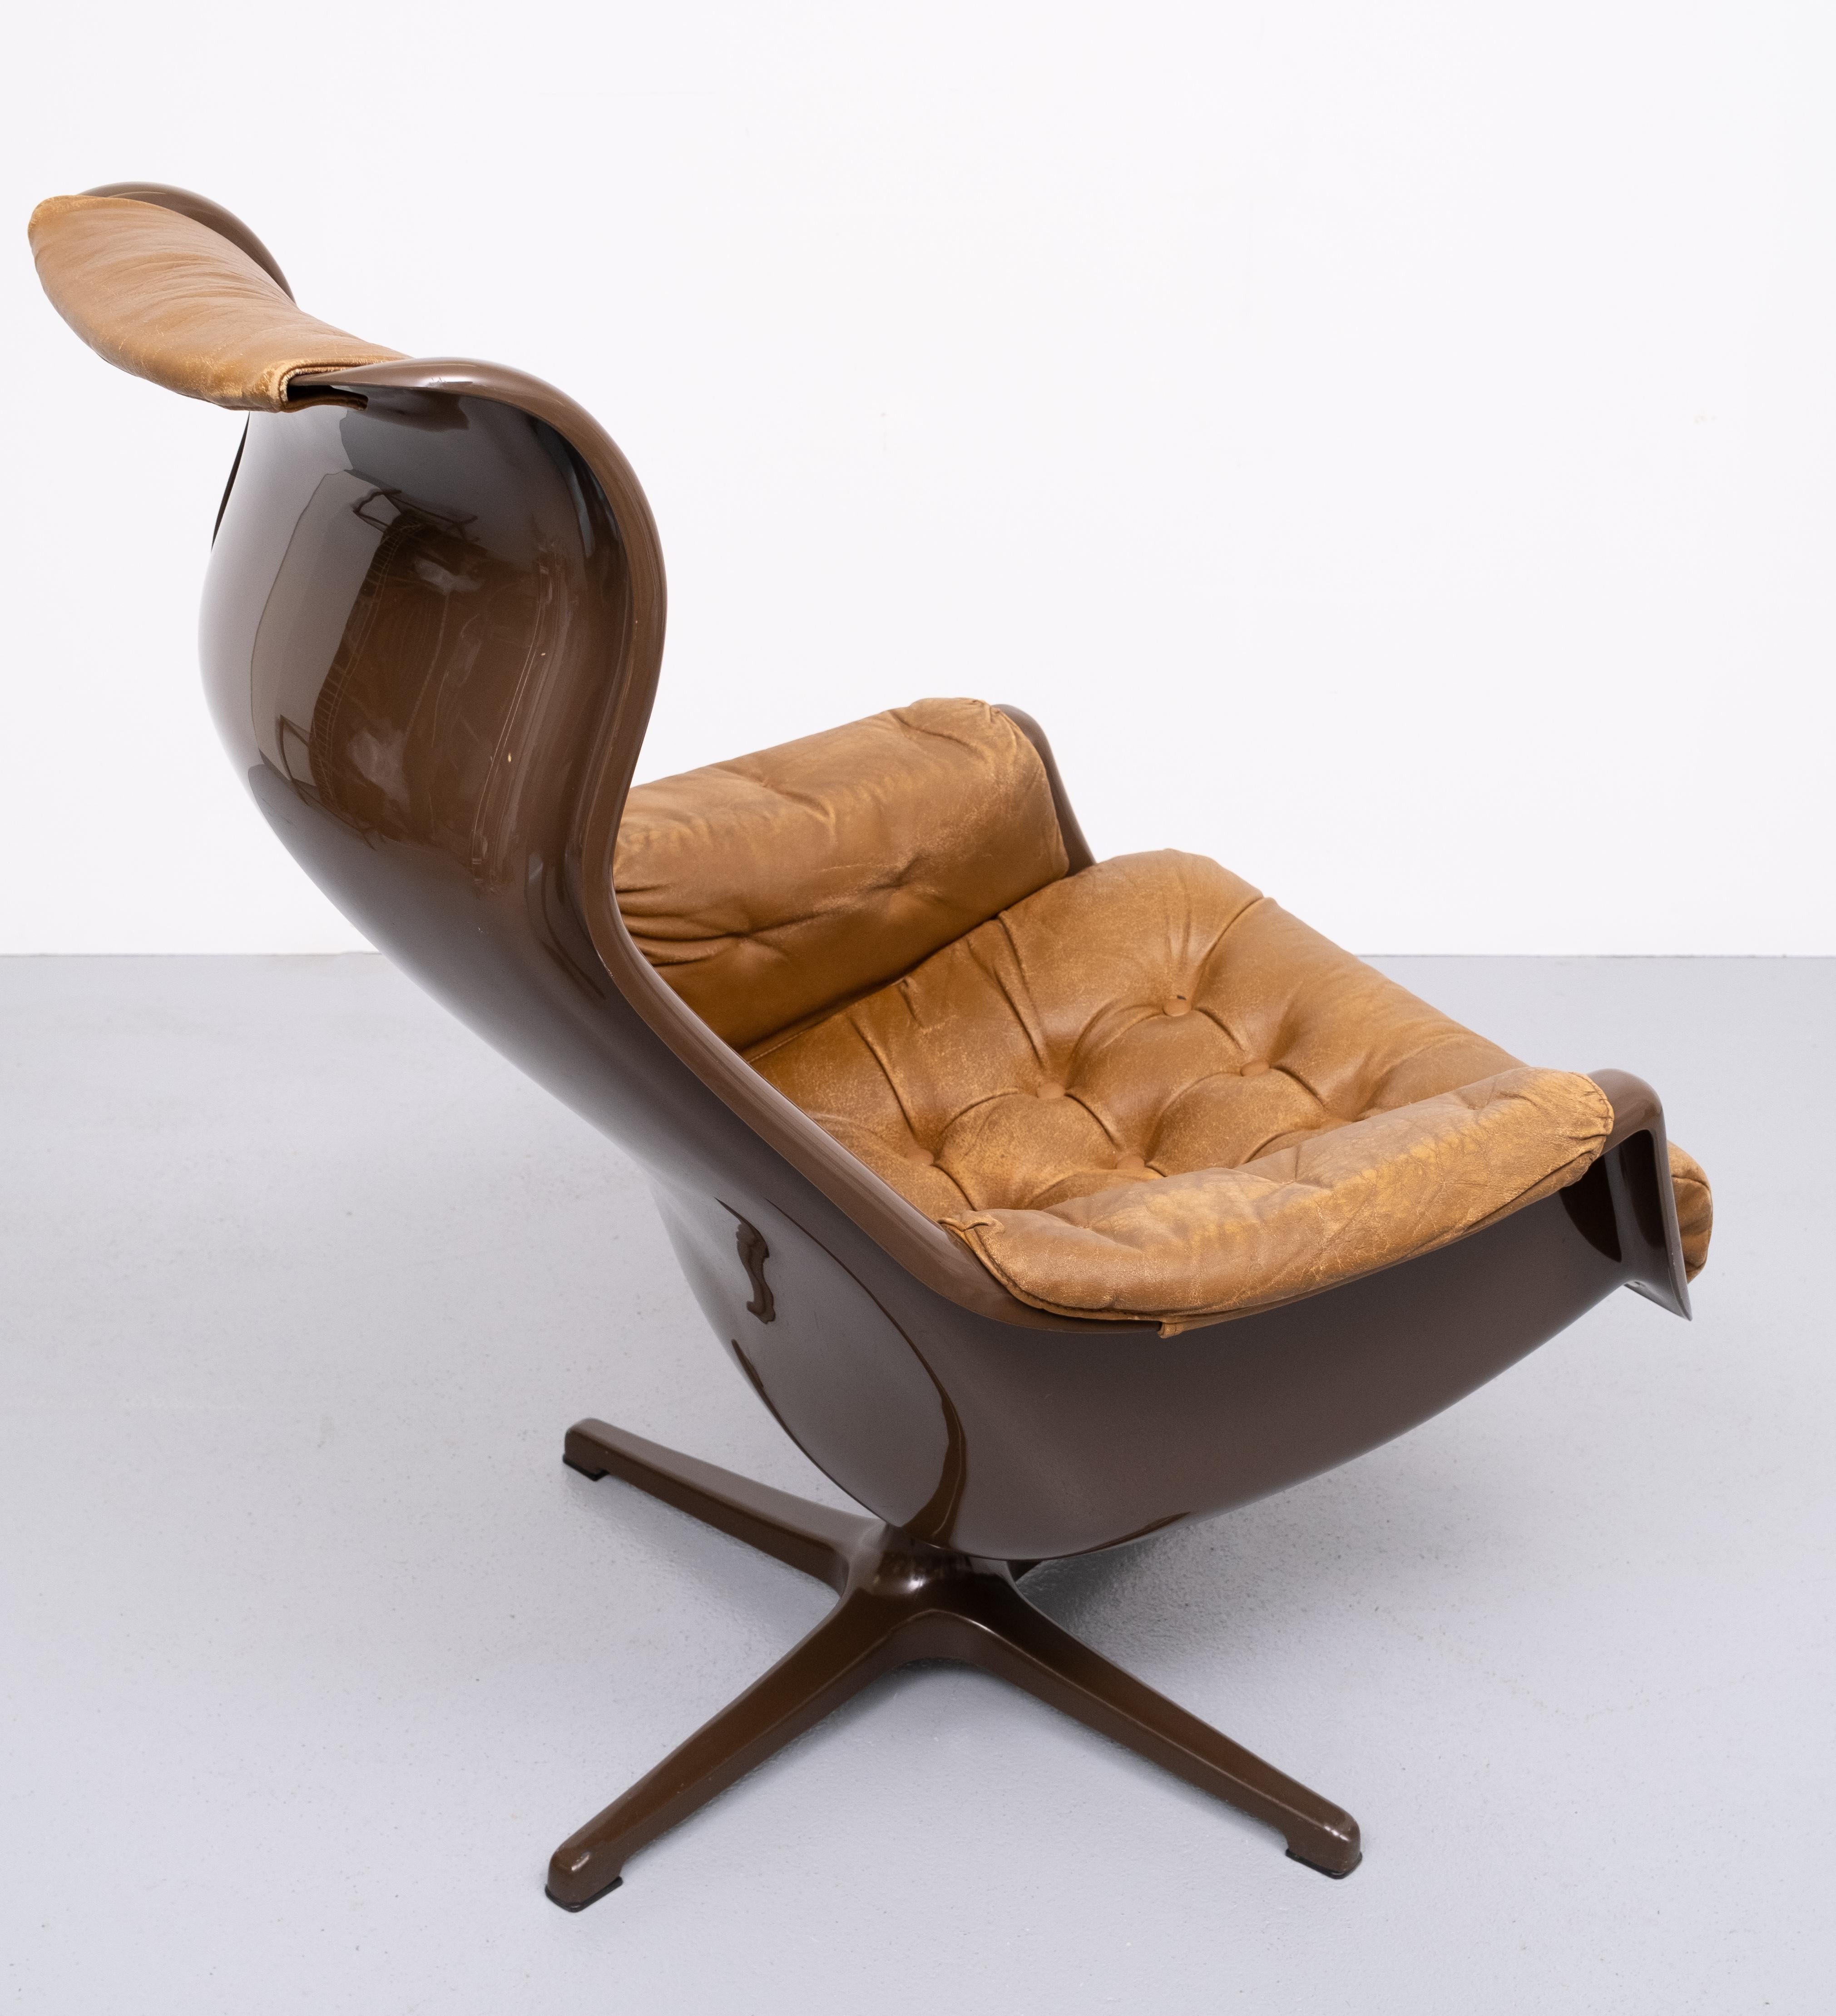 Nice Space Age curved galaxy lounge chair. The armchair features a dark Brown plastic body with a Leather Cognac color removable upholstery and an aluminum tunable base. The armchair was designed by v and Yngvar Sandström and manufactured by DUX, in